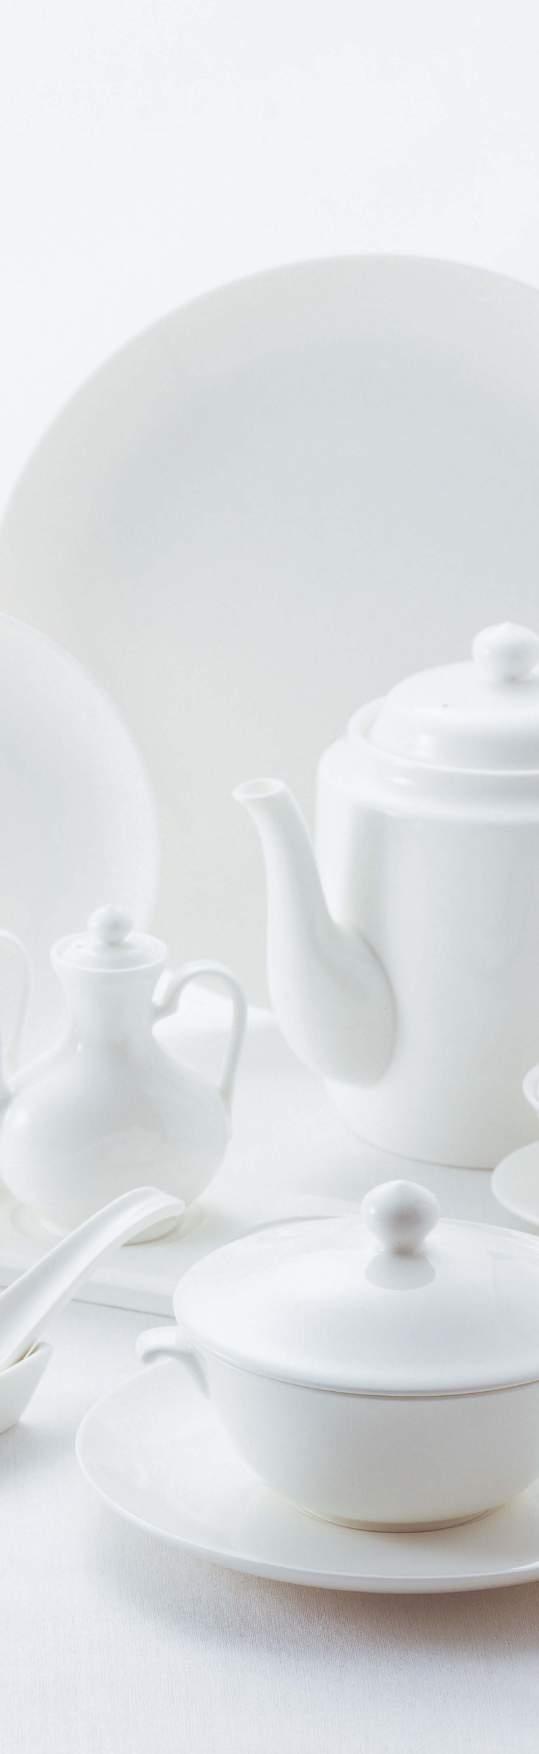 CHINESE 92626 White 92626-4294 CHINESE TEA POT (L) L212mm/S121mm/H194mm 1,570cc 92626-4295 CHINESE TEA POT (S) L200mm/S119mm/H163mm 1,130cc 92626-4337 CHINESE TEA POT (M) L232mm/S149mm/H99mm 1,060cc